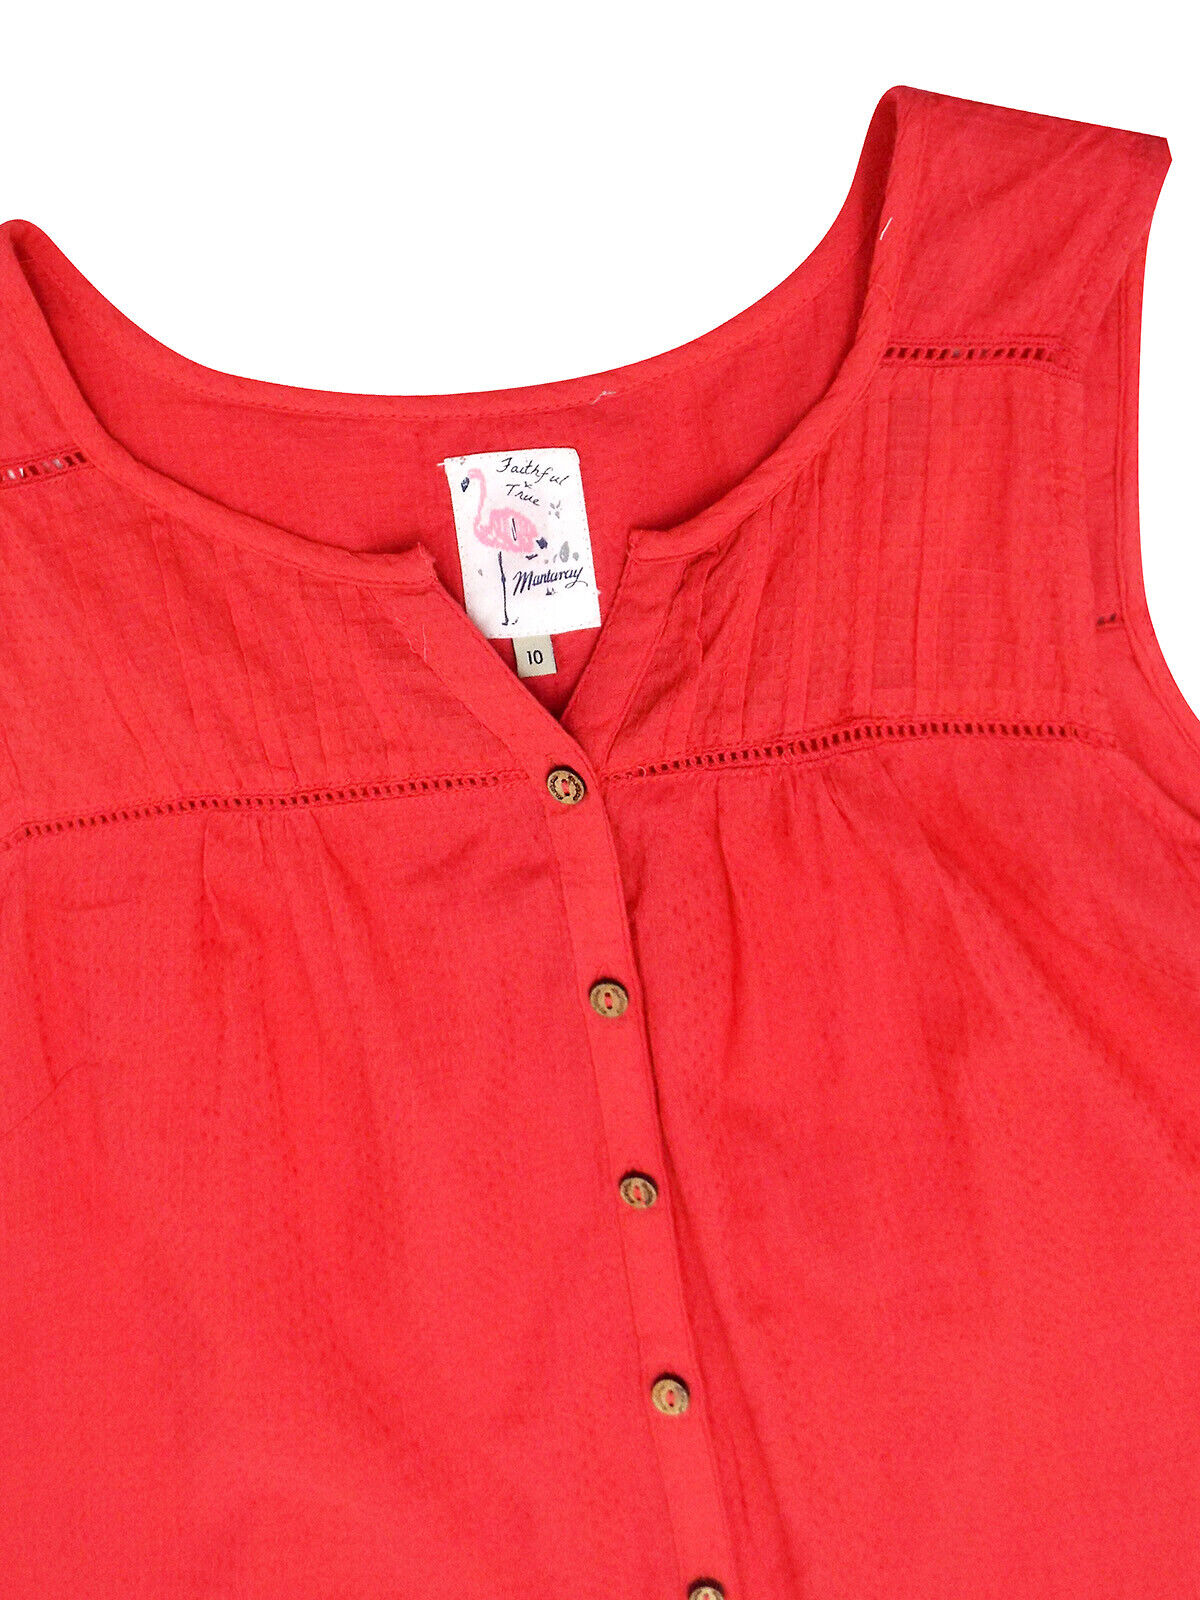 EX Mantaray Red Textured Cotton Top in Sizes 12, 14, 16, 18, 20, 22